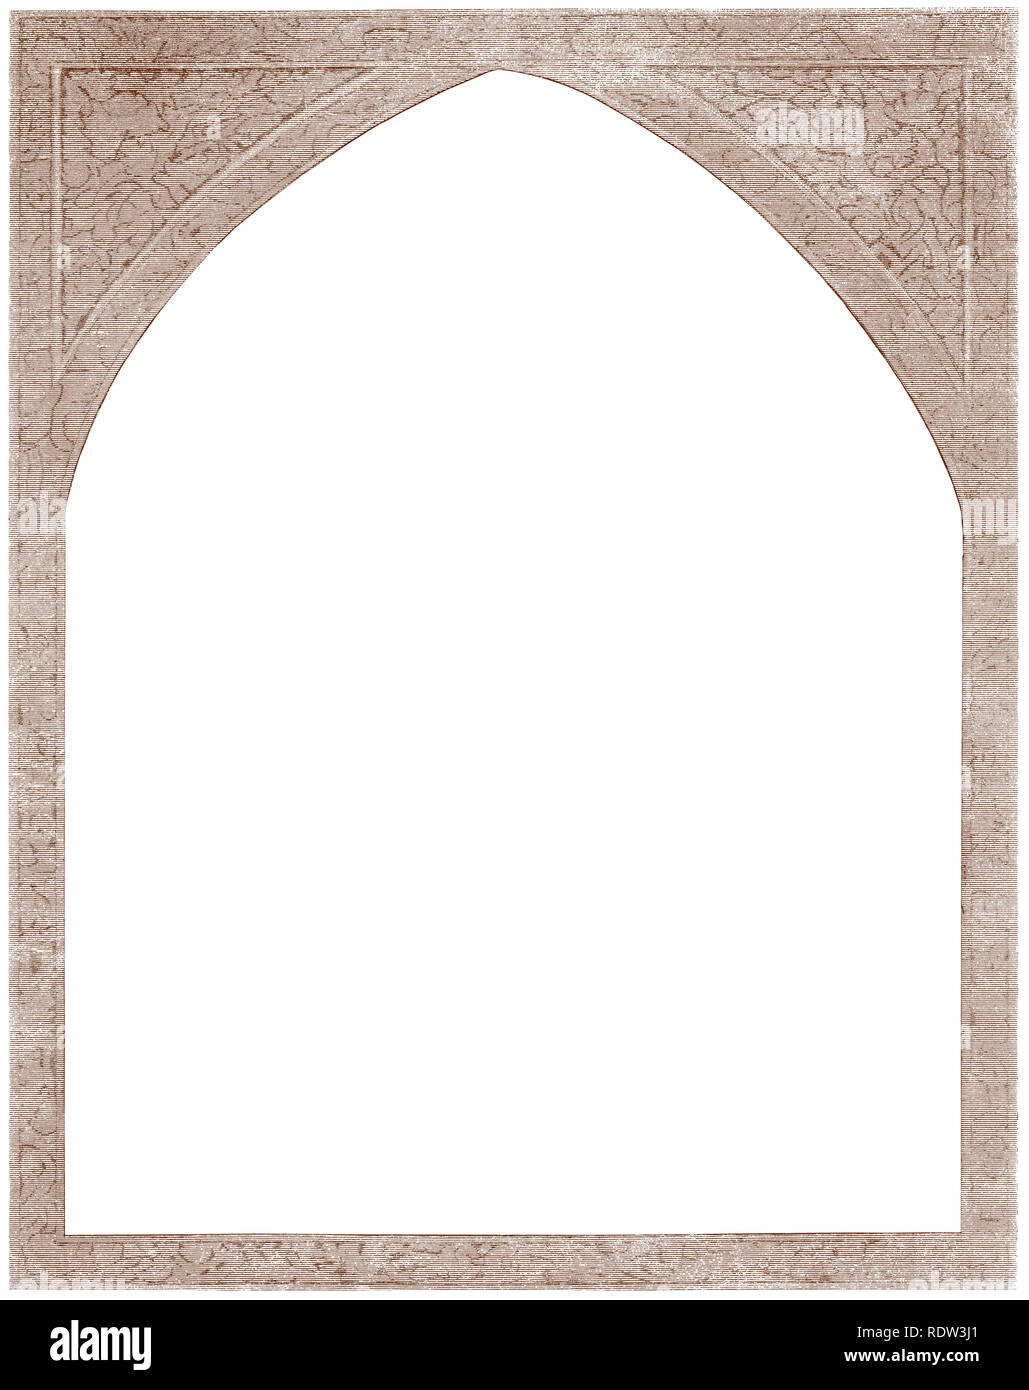 Arched early Victorian wood-textured engraved border Stock Photo